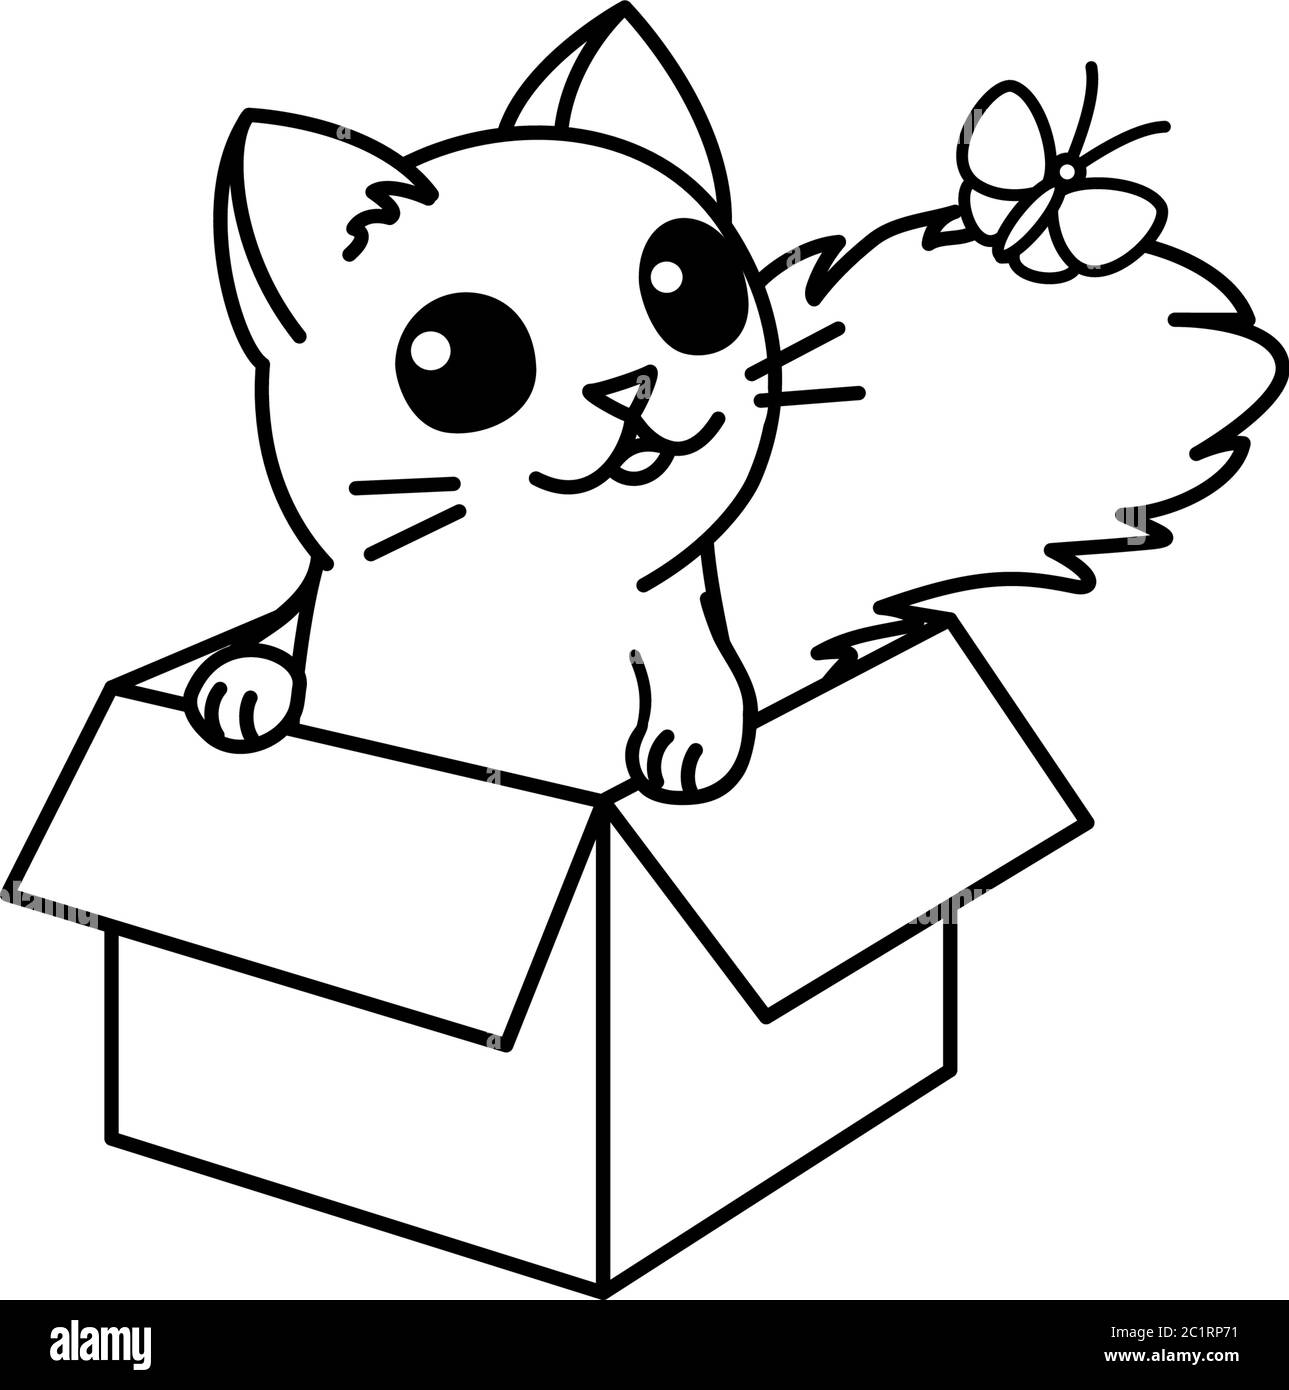 Kitten Coloring Pages Vector Art, Icons, and Graphics for Free